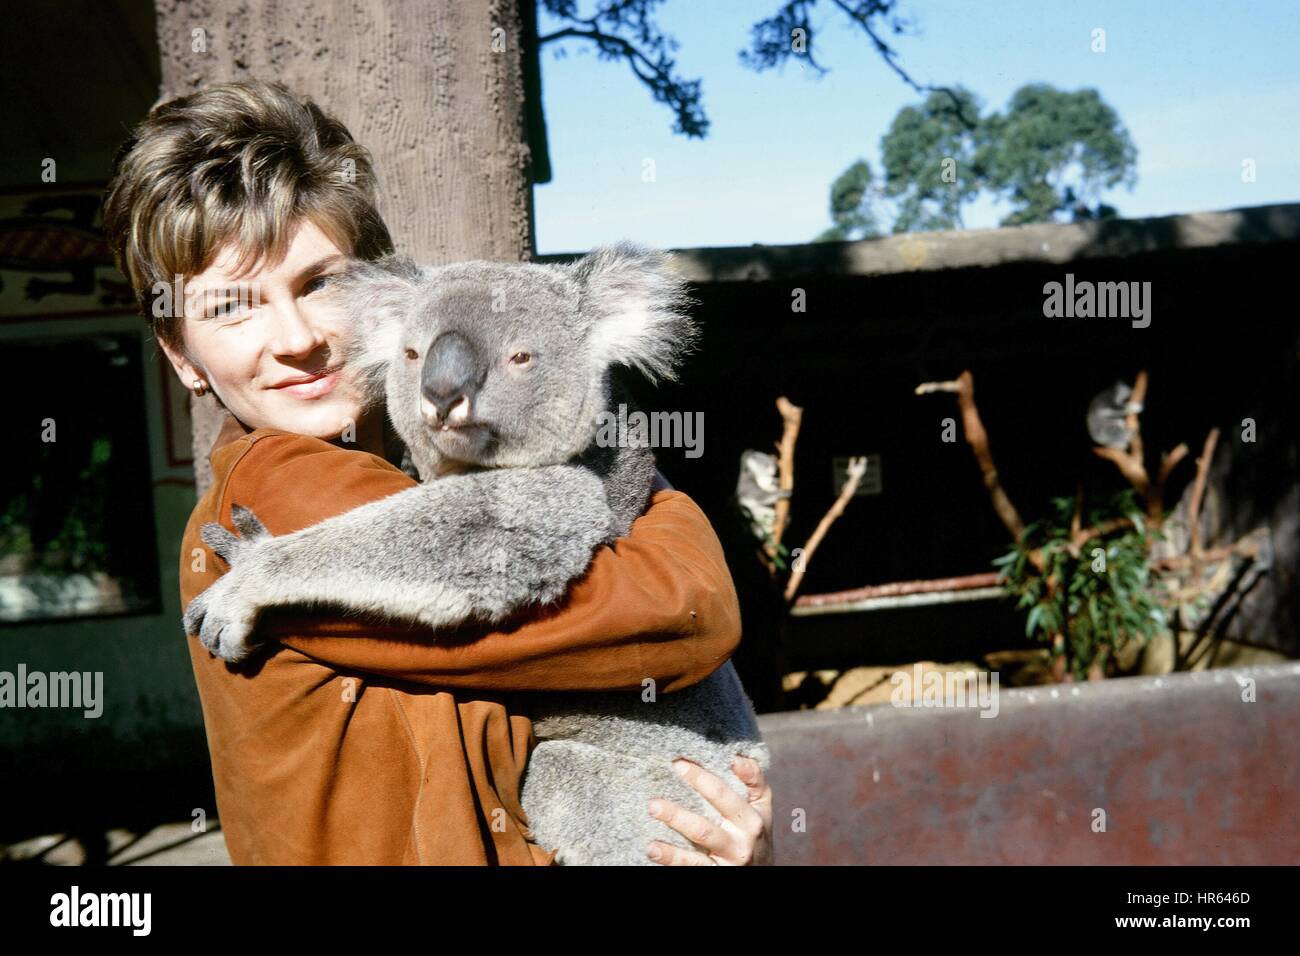 A woman holds a Koala Bear at a park, other Koalas are visible in the background, 1970. Stock Photo